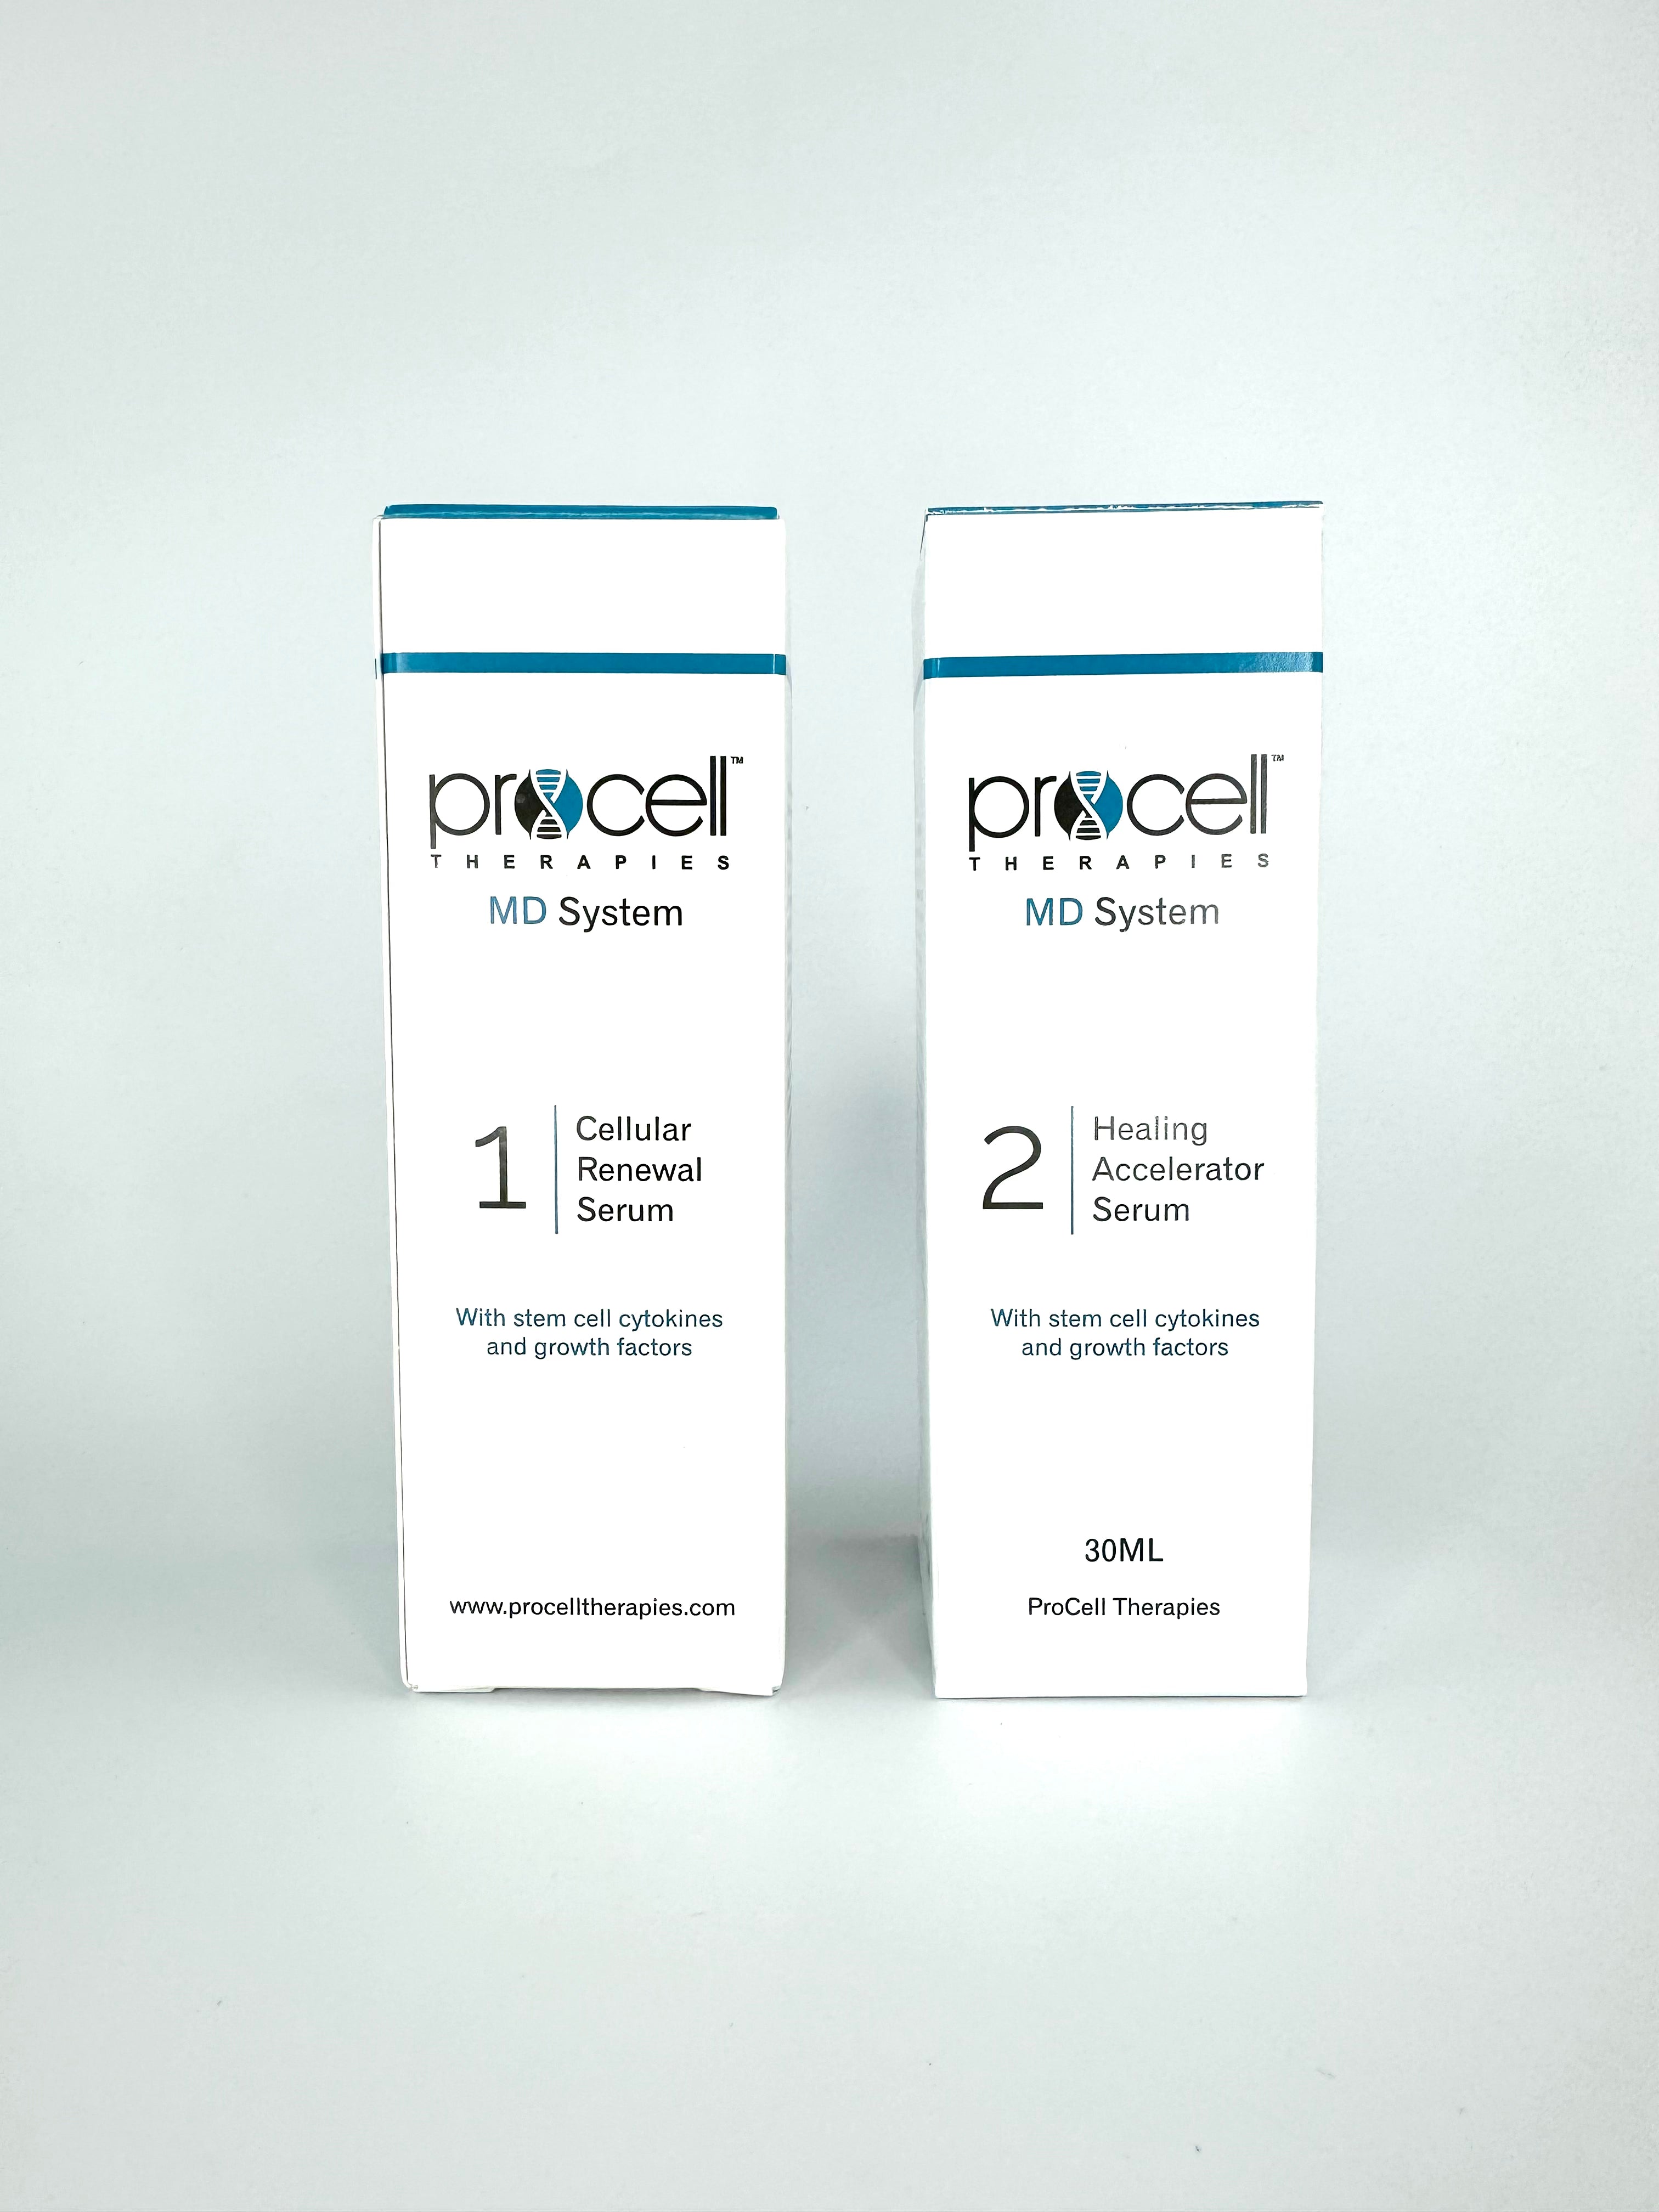 MD Cellular Renewal Serum from ProCell